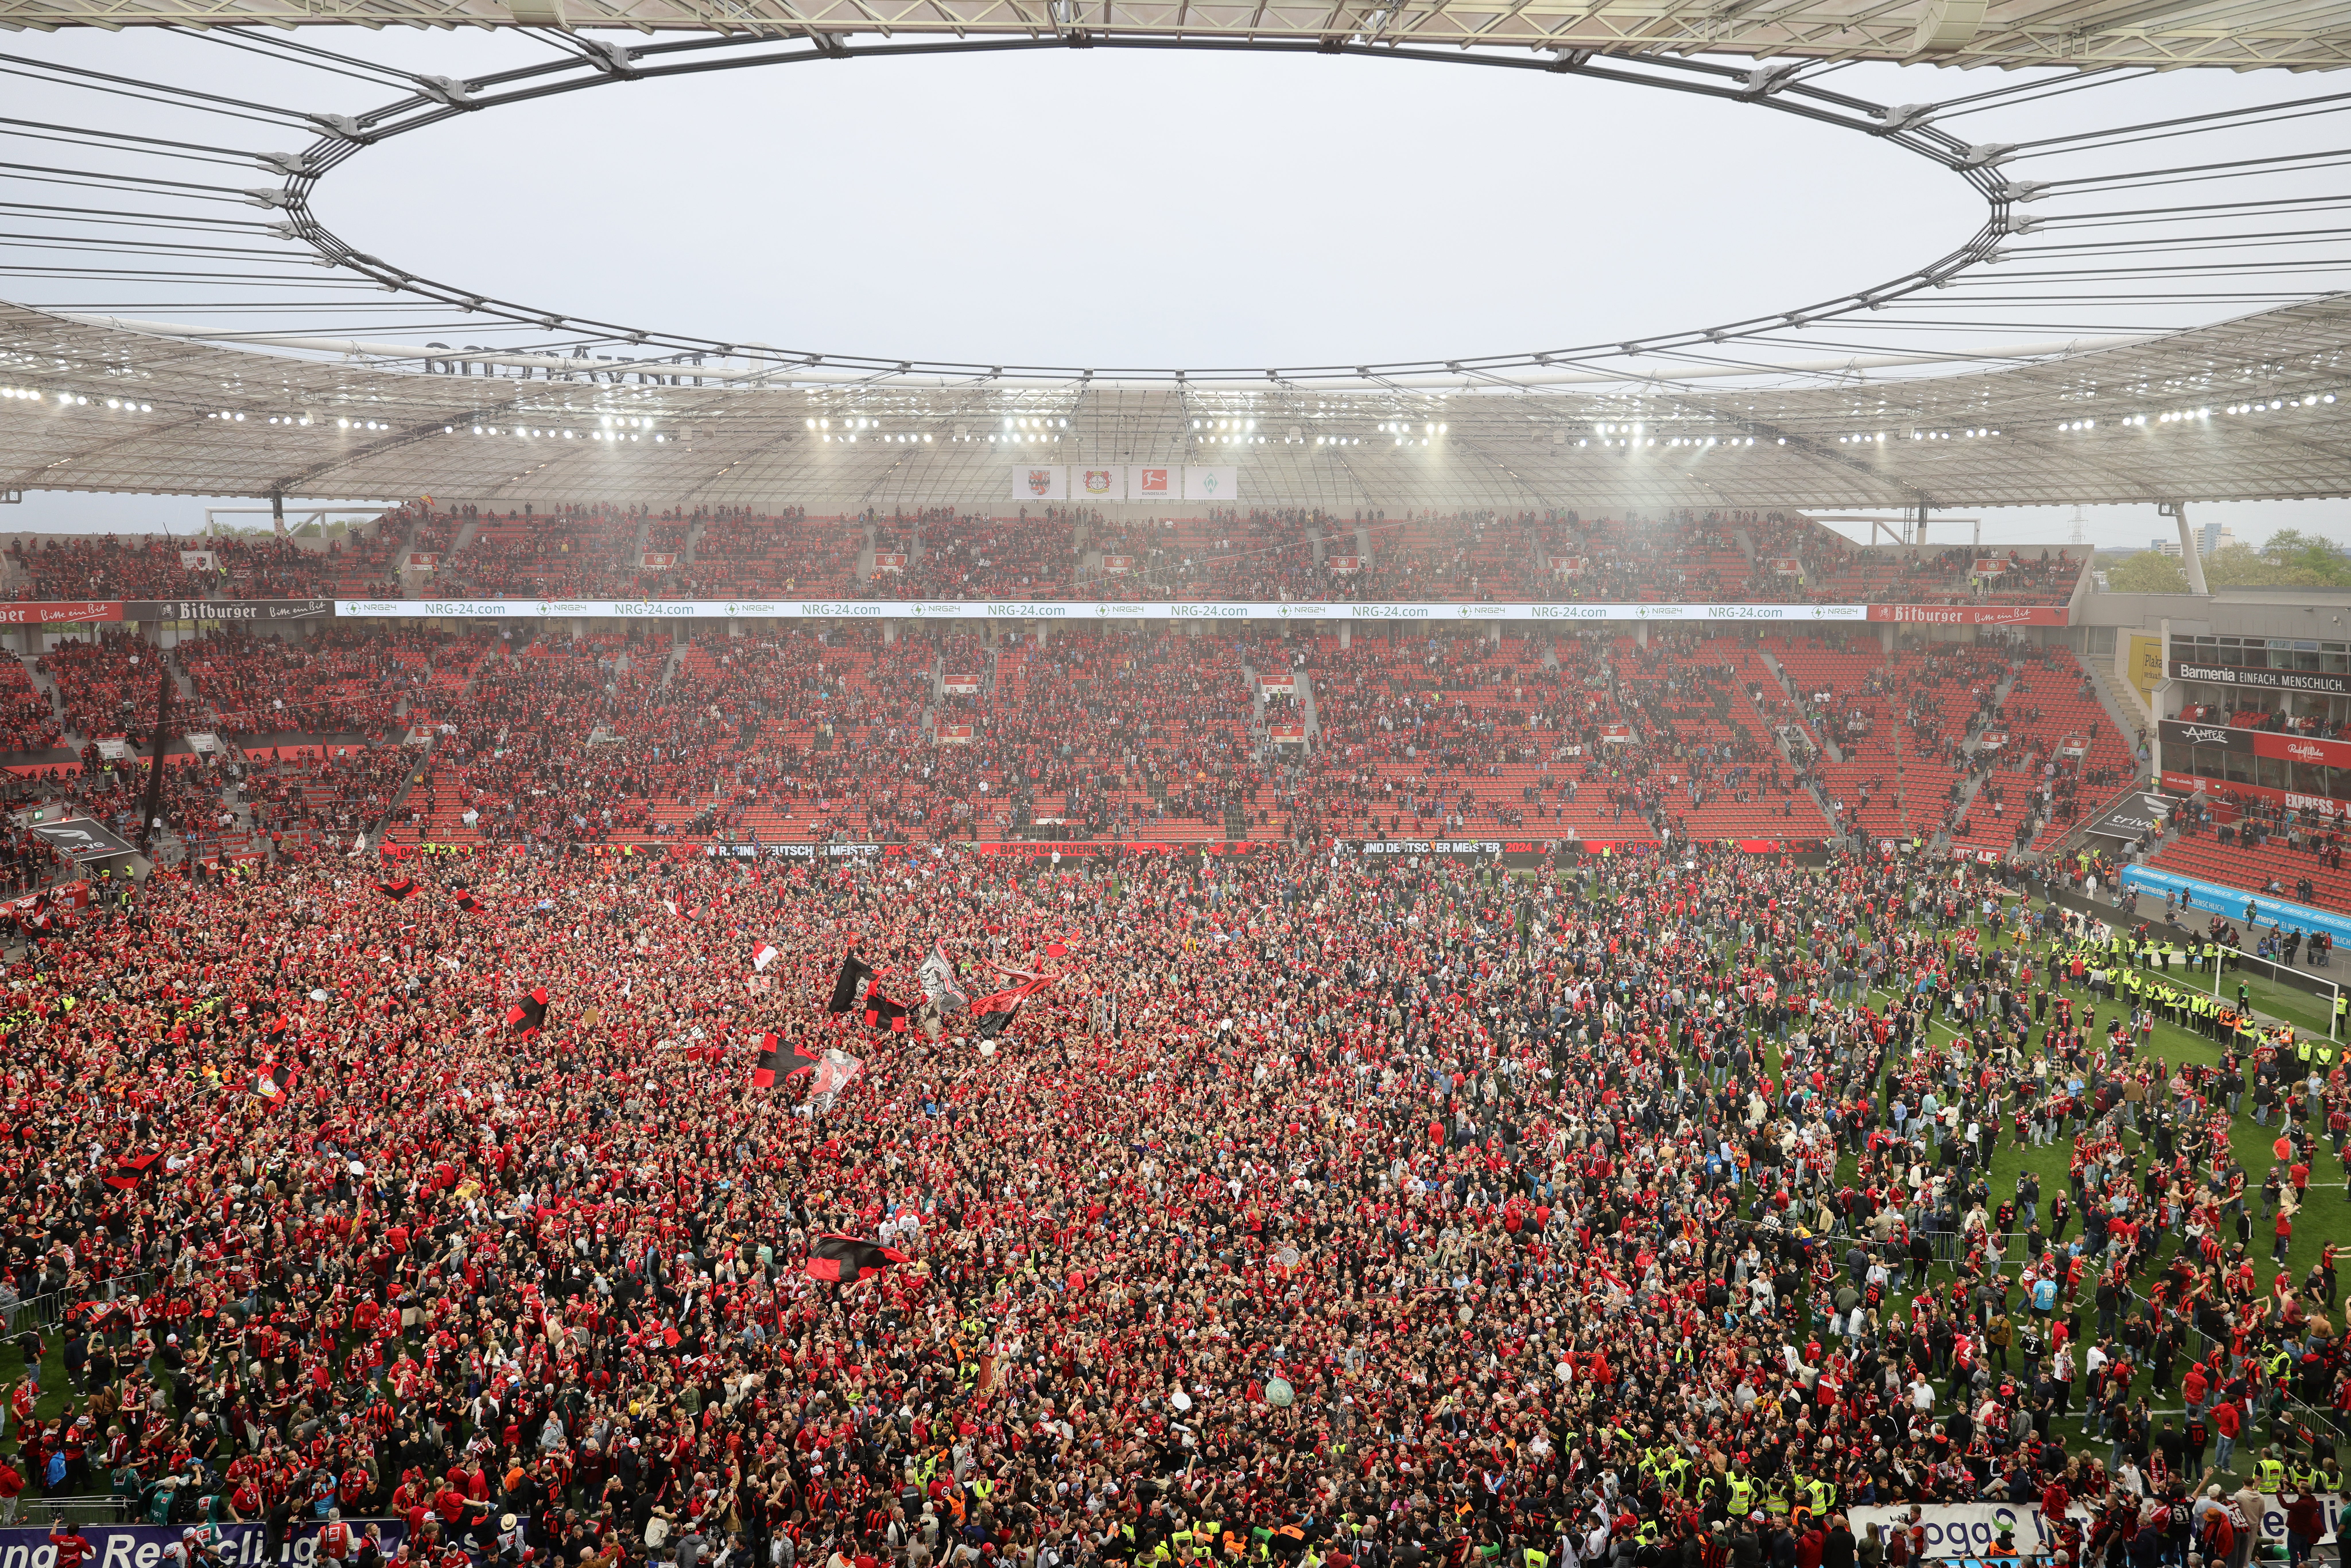 Fans invaded the pitch as Levekusen defeated Werder Bremen 5-0 at home